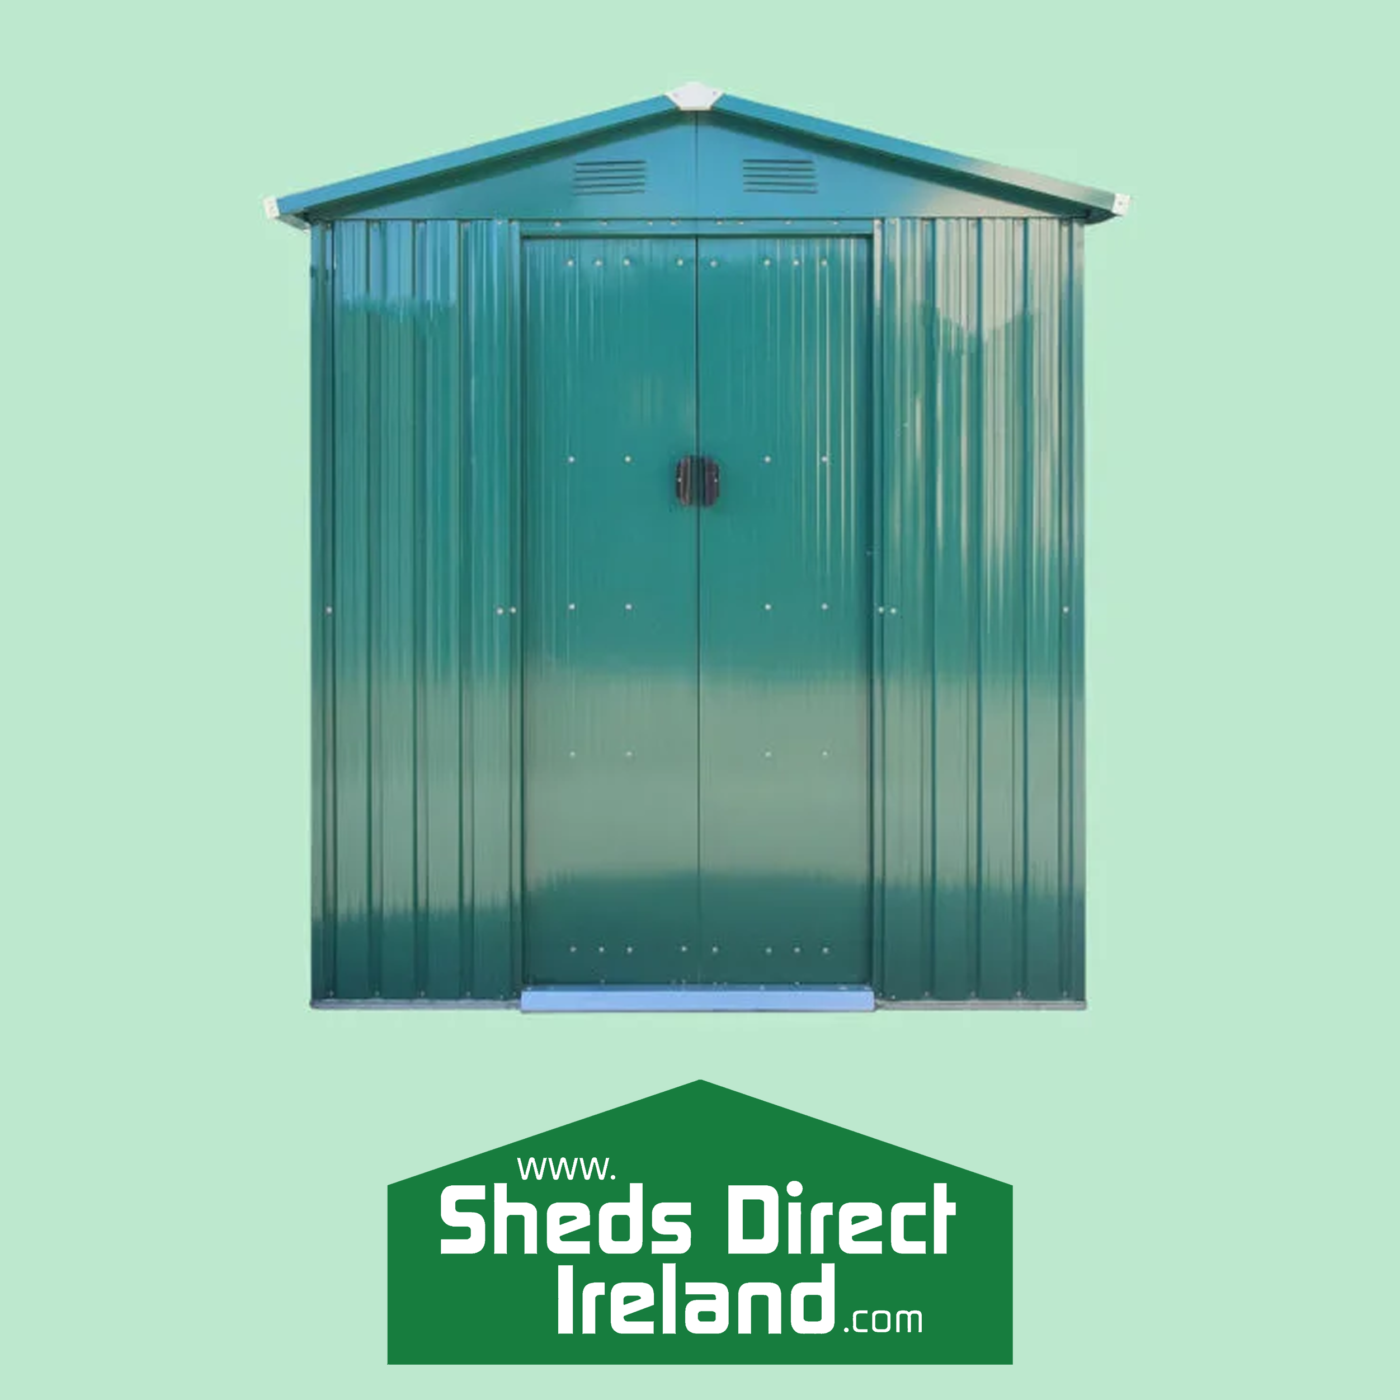 The sheds direct Ireland logo above a green, steel garden shed